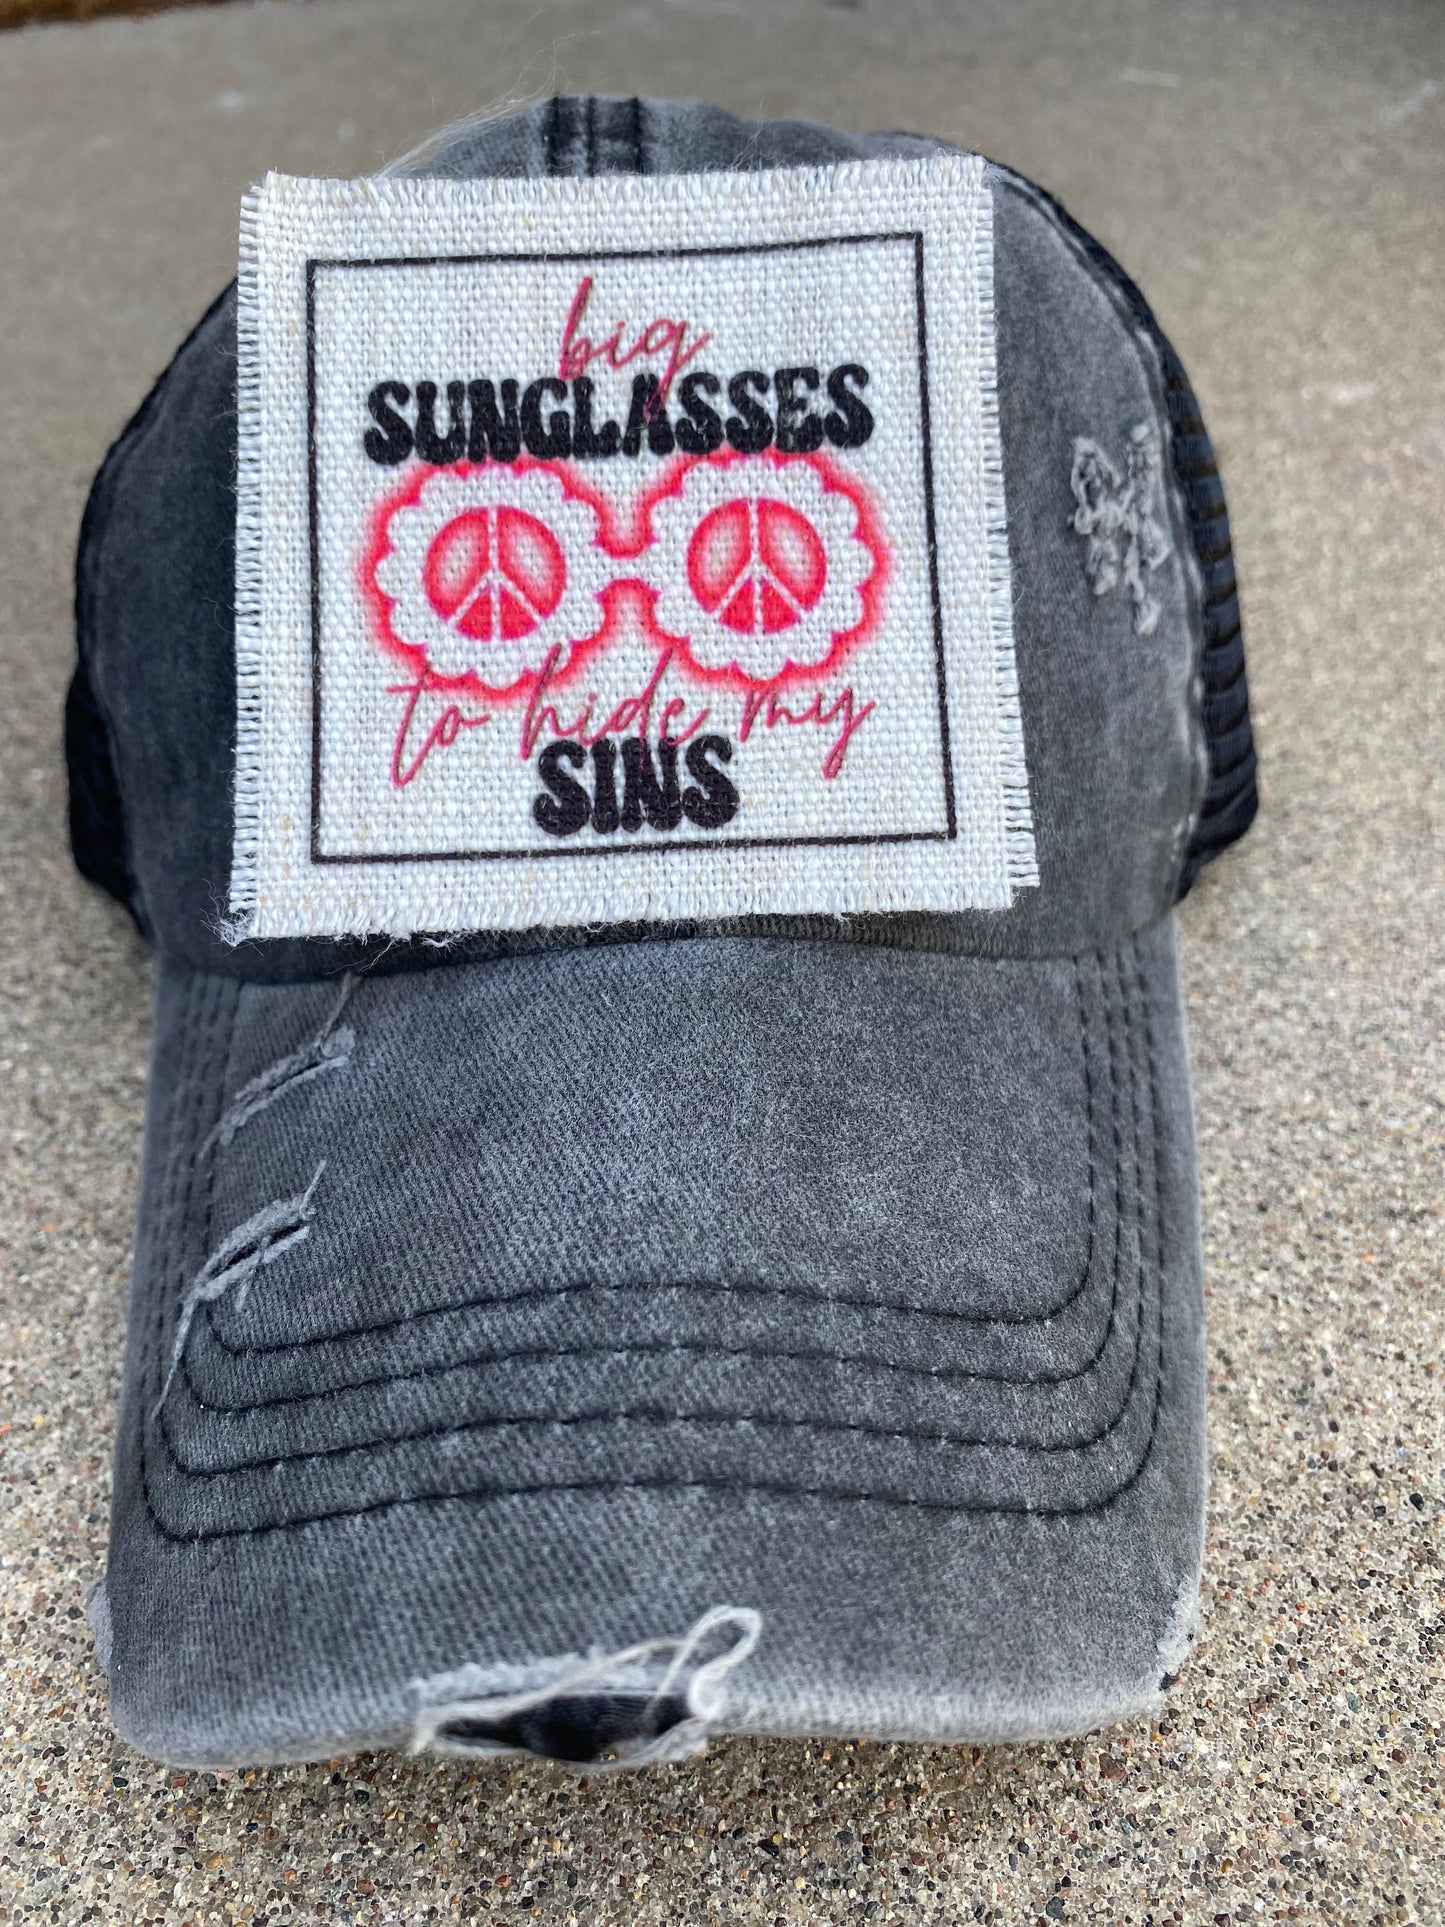 Big Sunglasses To Hide My Sins Hat Patch